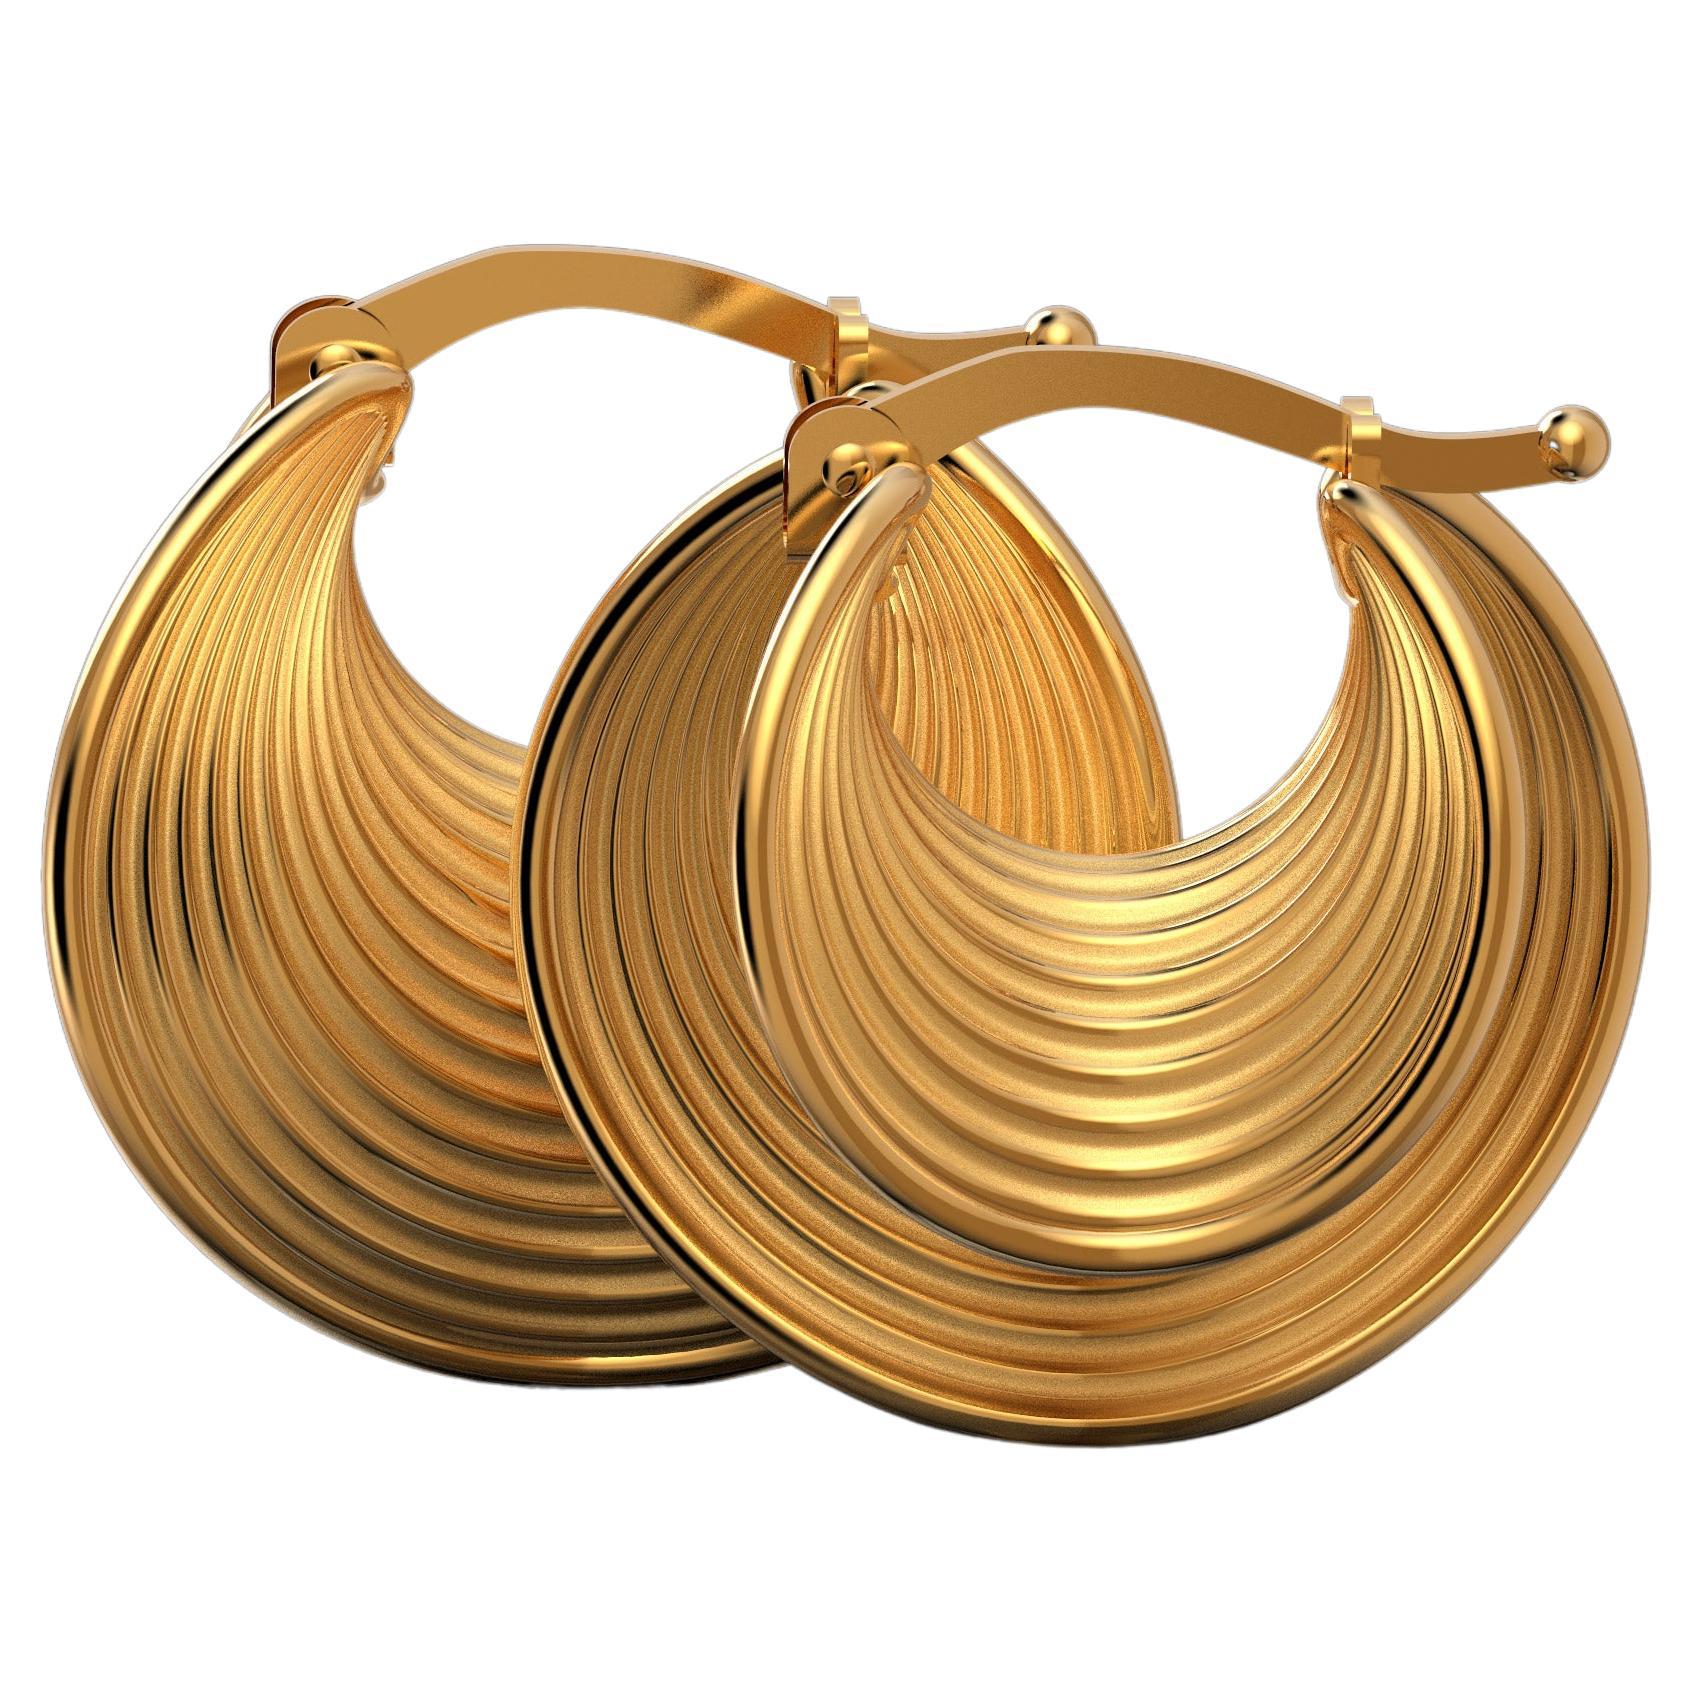 Elegant, modern in their innovative shape but classic at the same time.
18 mm diameter beautiful hoop earrings crafted in polished and raw solid gold 18k.
The production time of this jewel varies from 4-6 working weeks.
The earrings are secured by a